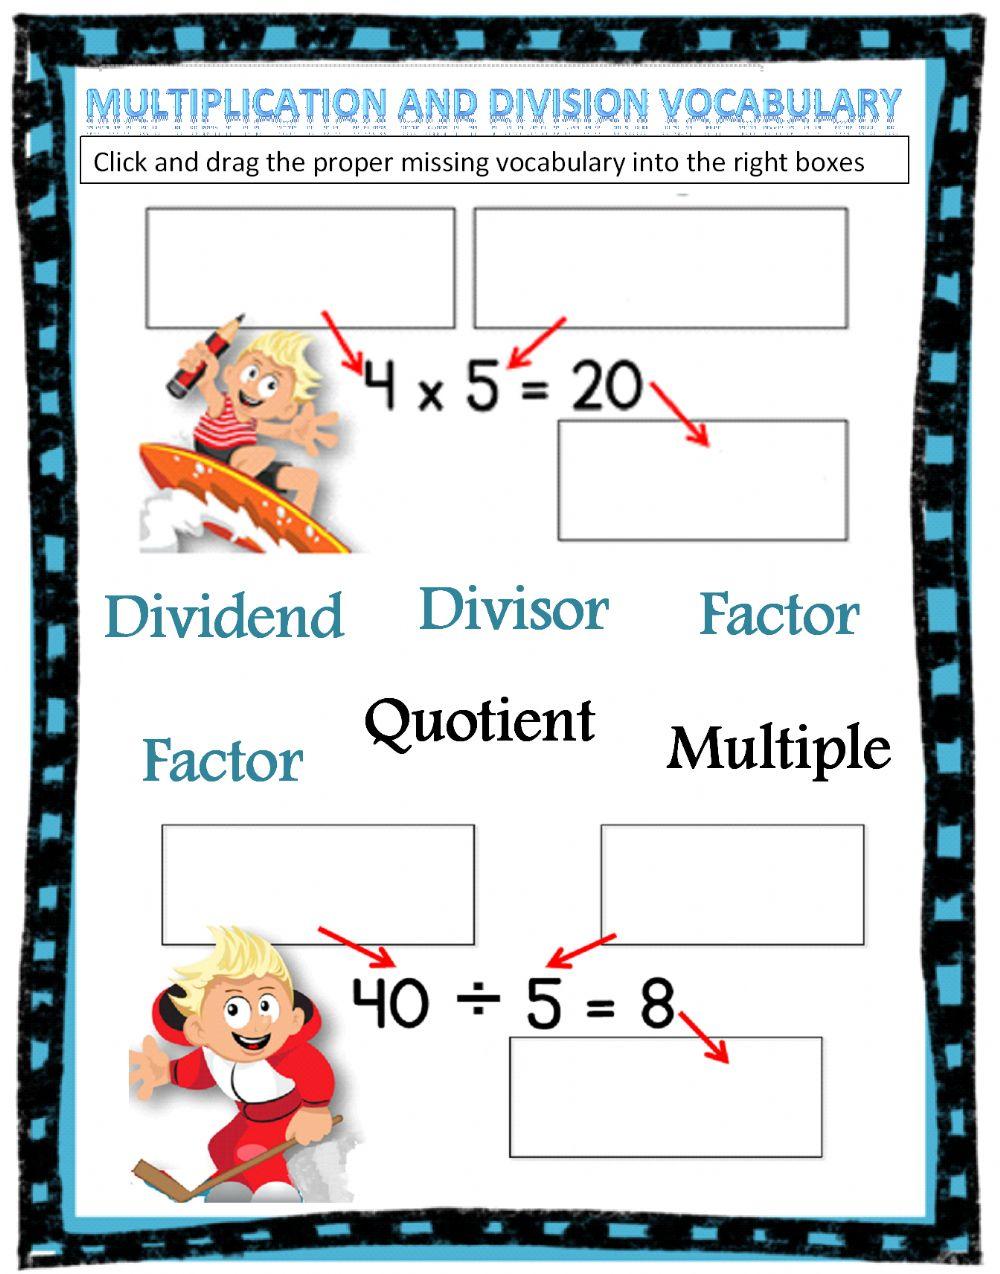 Multiplication and Division Vocabulary